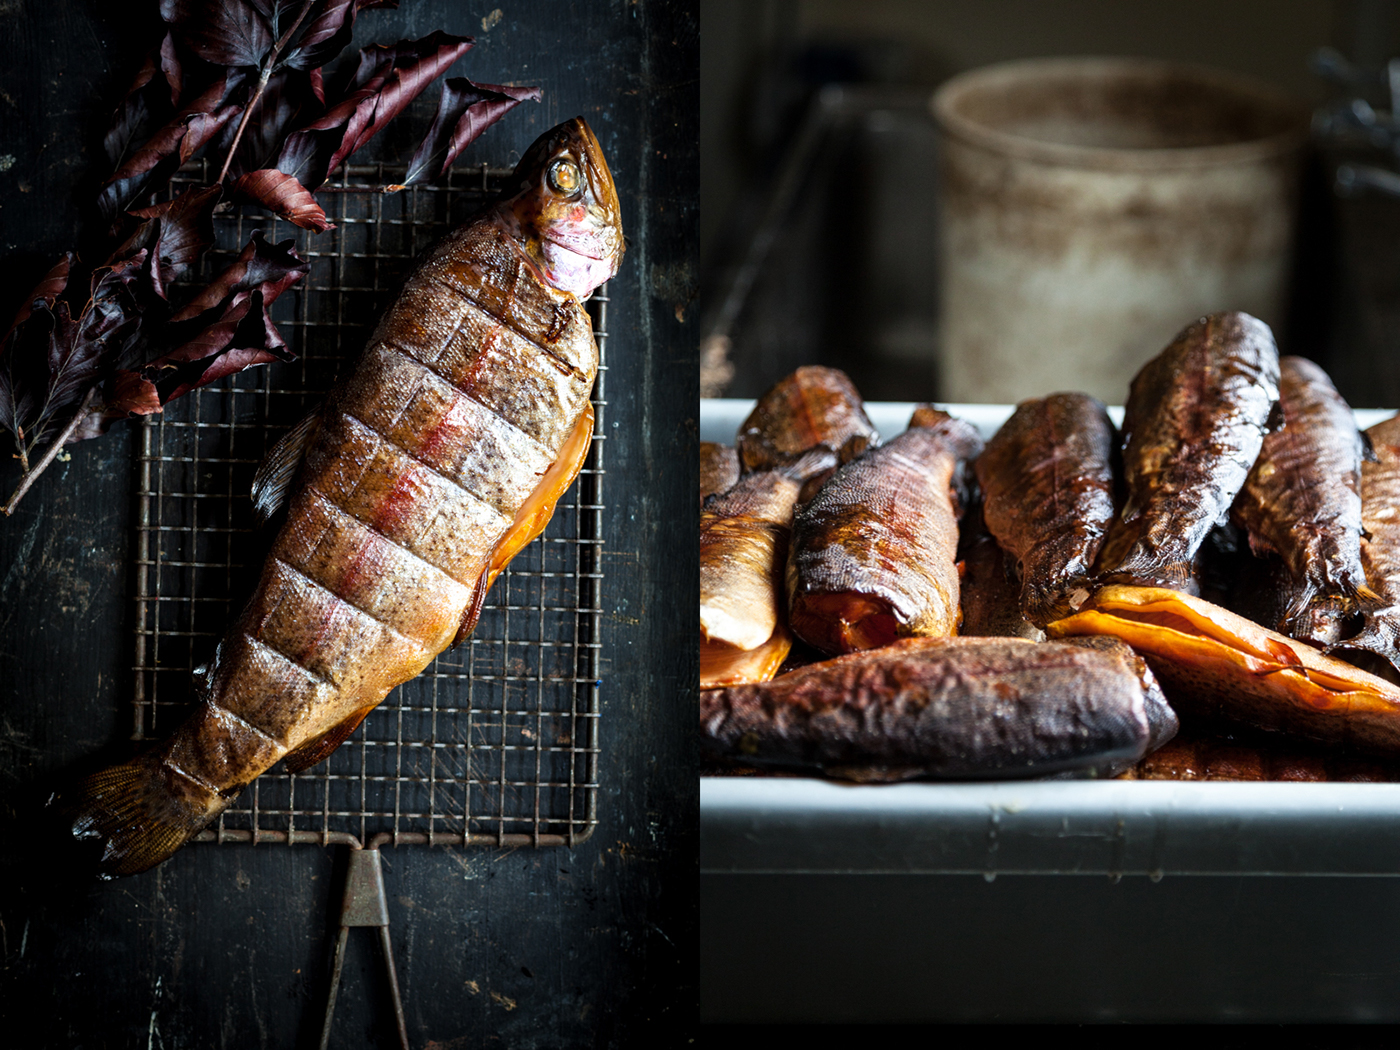 food photography food styling SMOKED FOOD Wild Food country food